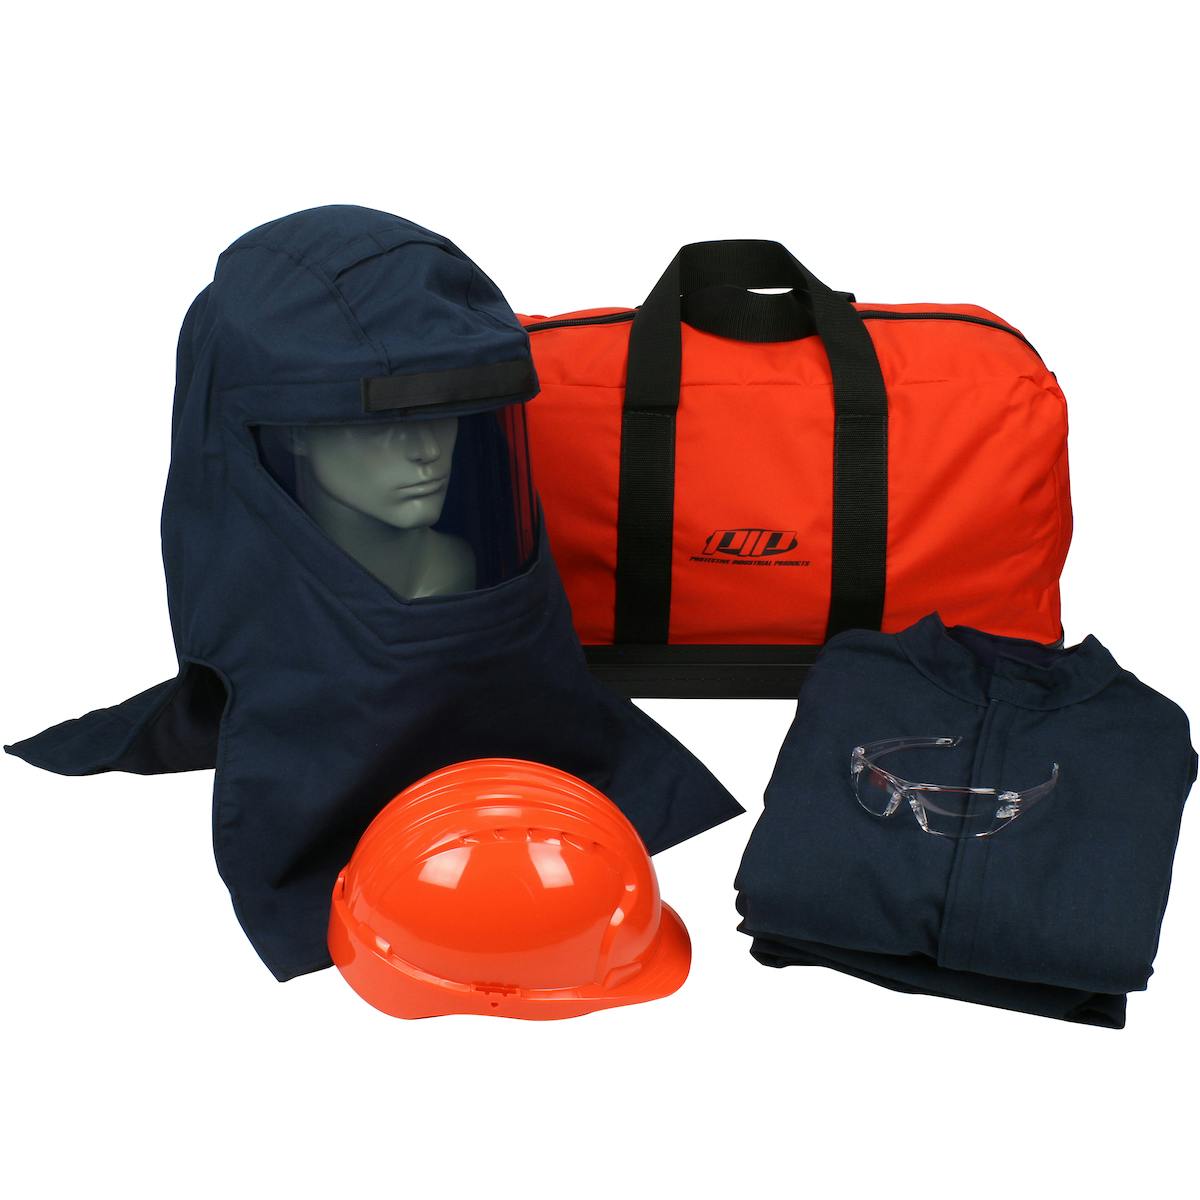 PIP® Ultralight PPE 4 Arc Flash Kit with Ventilated Hood - 40 Cal/cm2 (9150-54VULT)